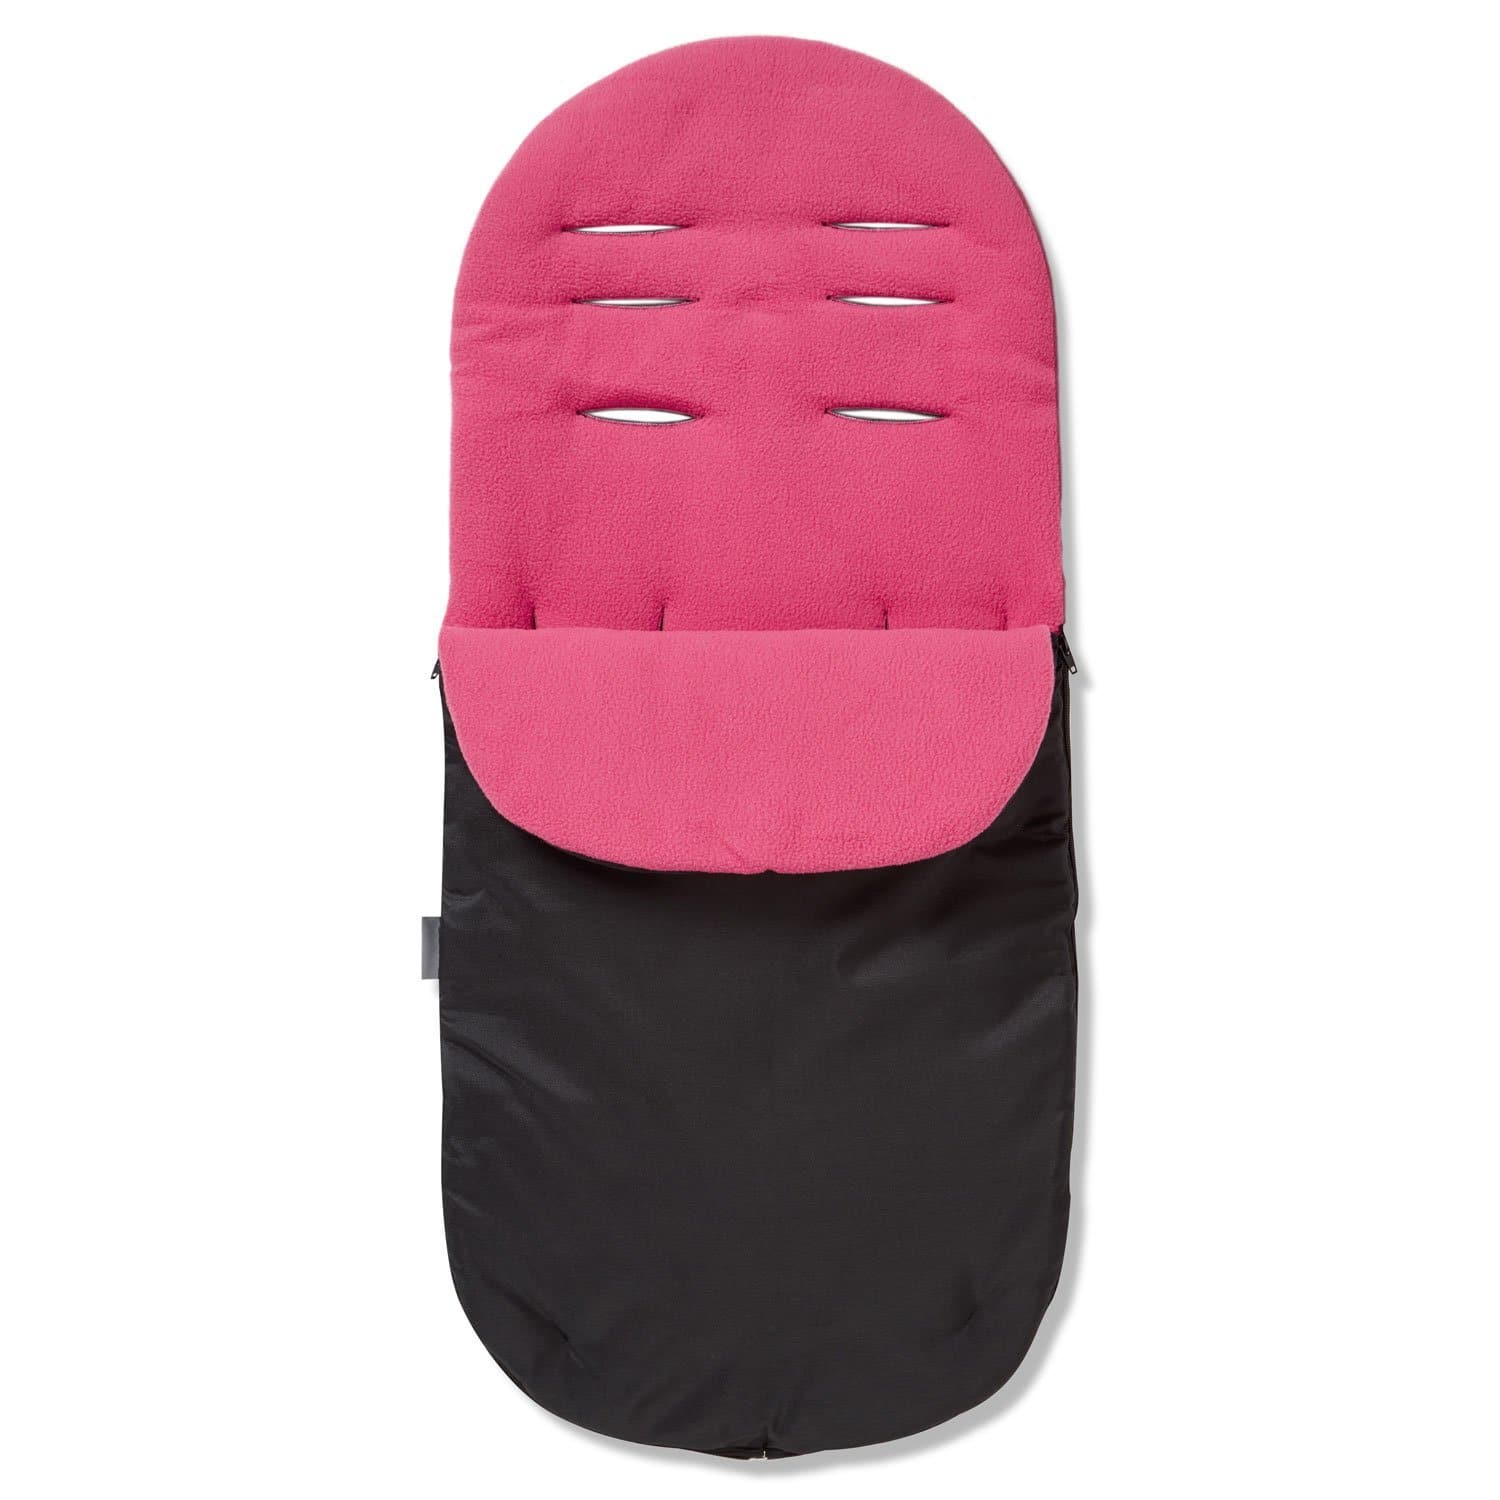 Footmuff / Cosy Toes Compatible with Mutsy - For Your Little One